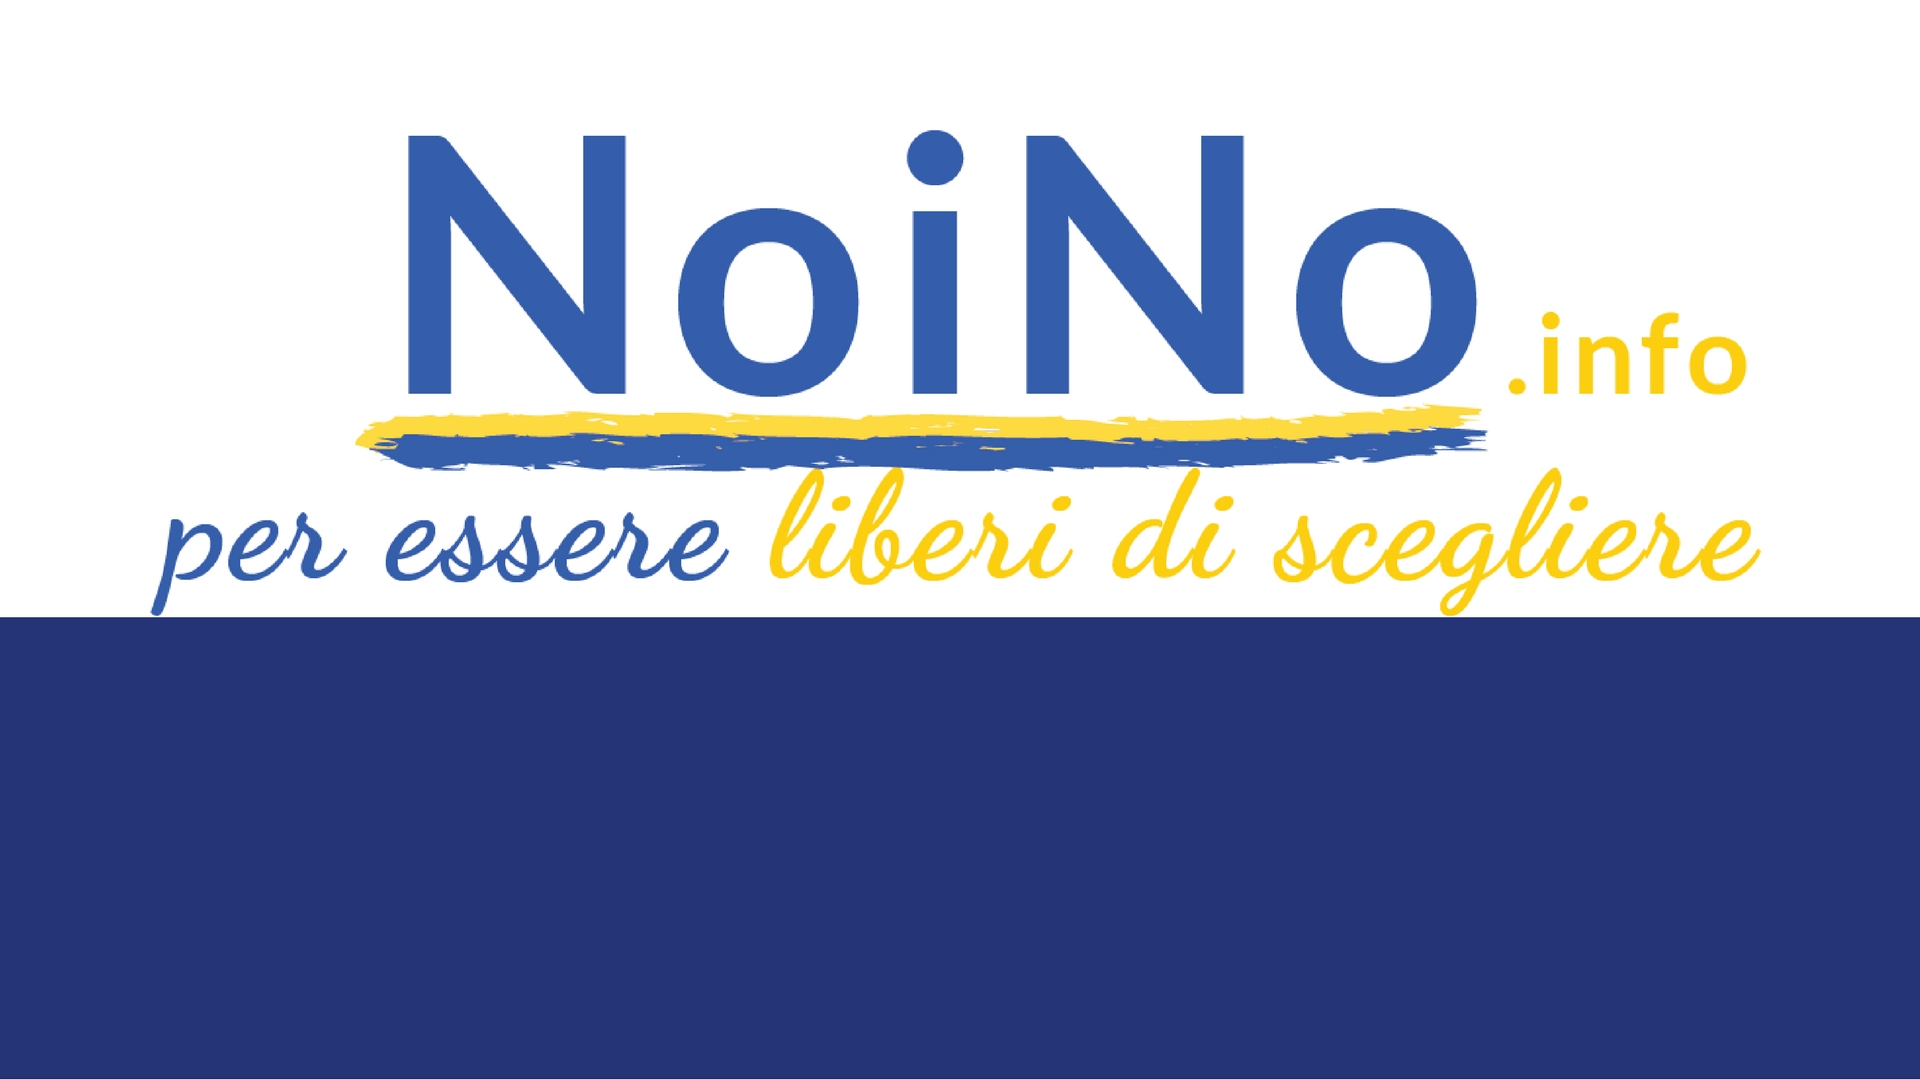 Voucher: the Liberal signs the document endorsing No for Cgil referendum